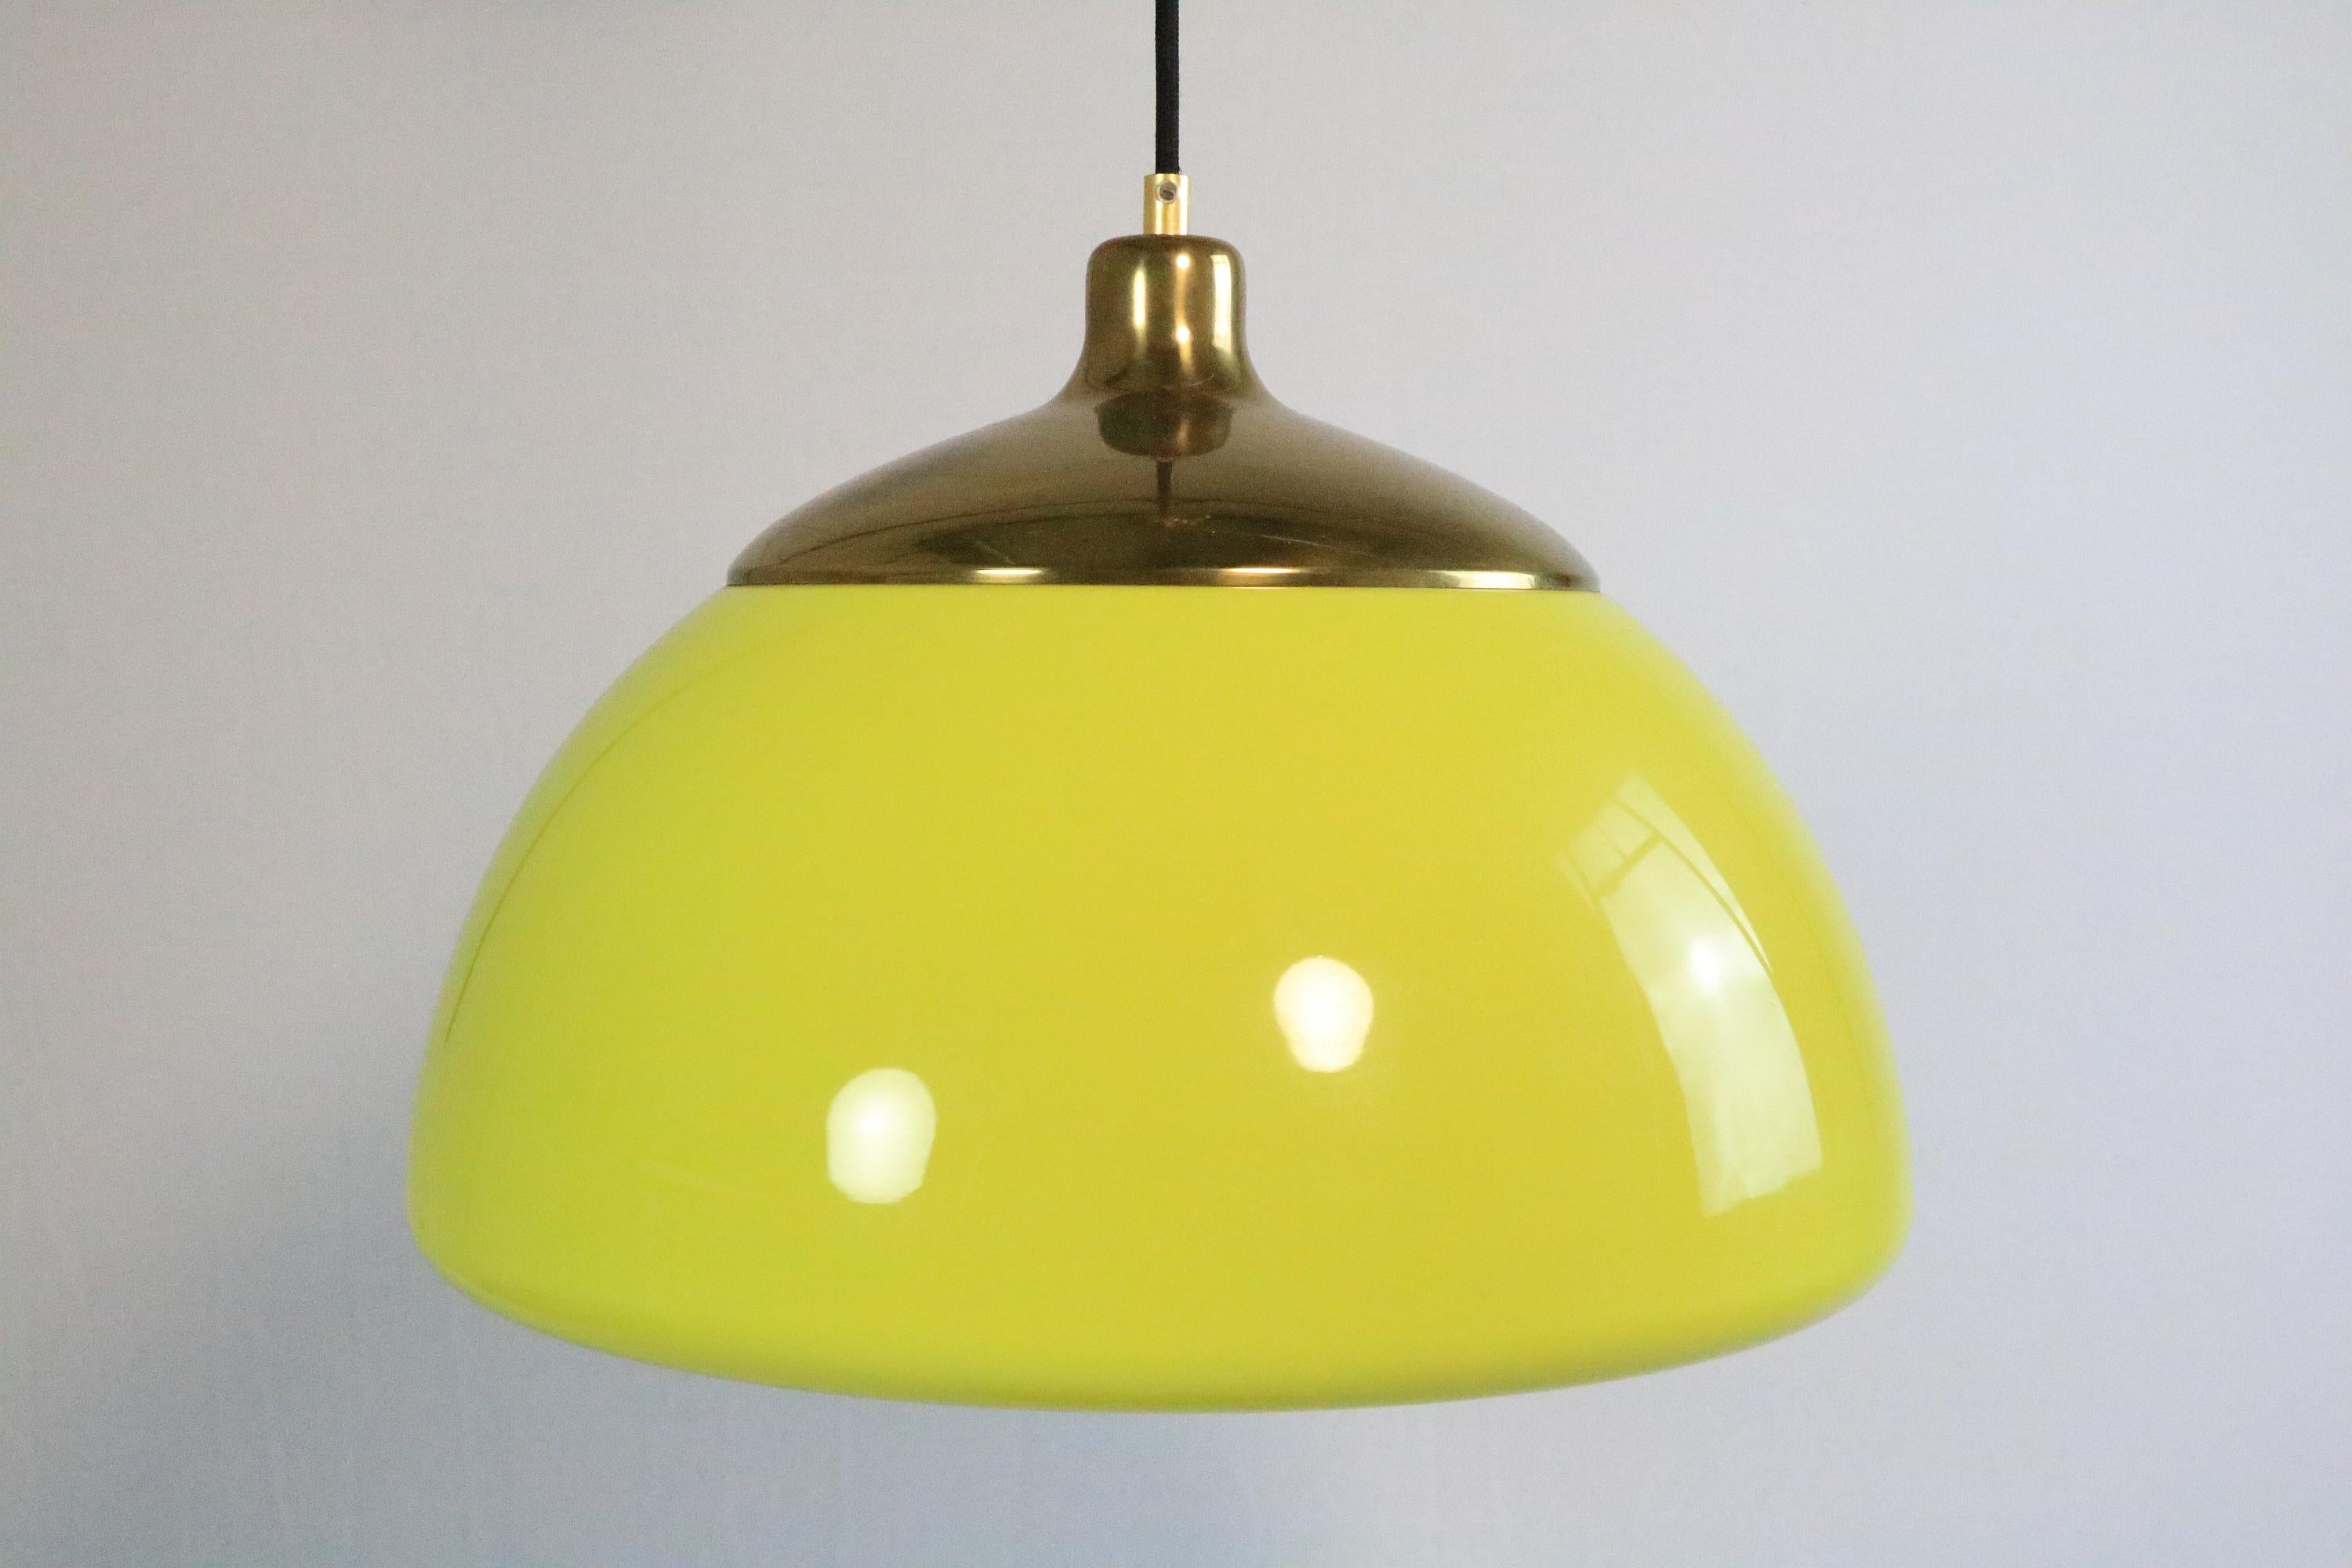 Original 1970s Pendant Light from COSACK, Germany For Sale 2